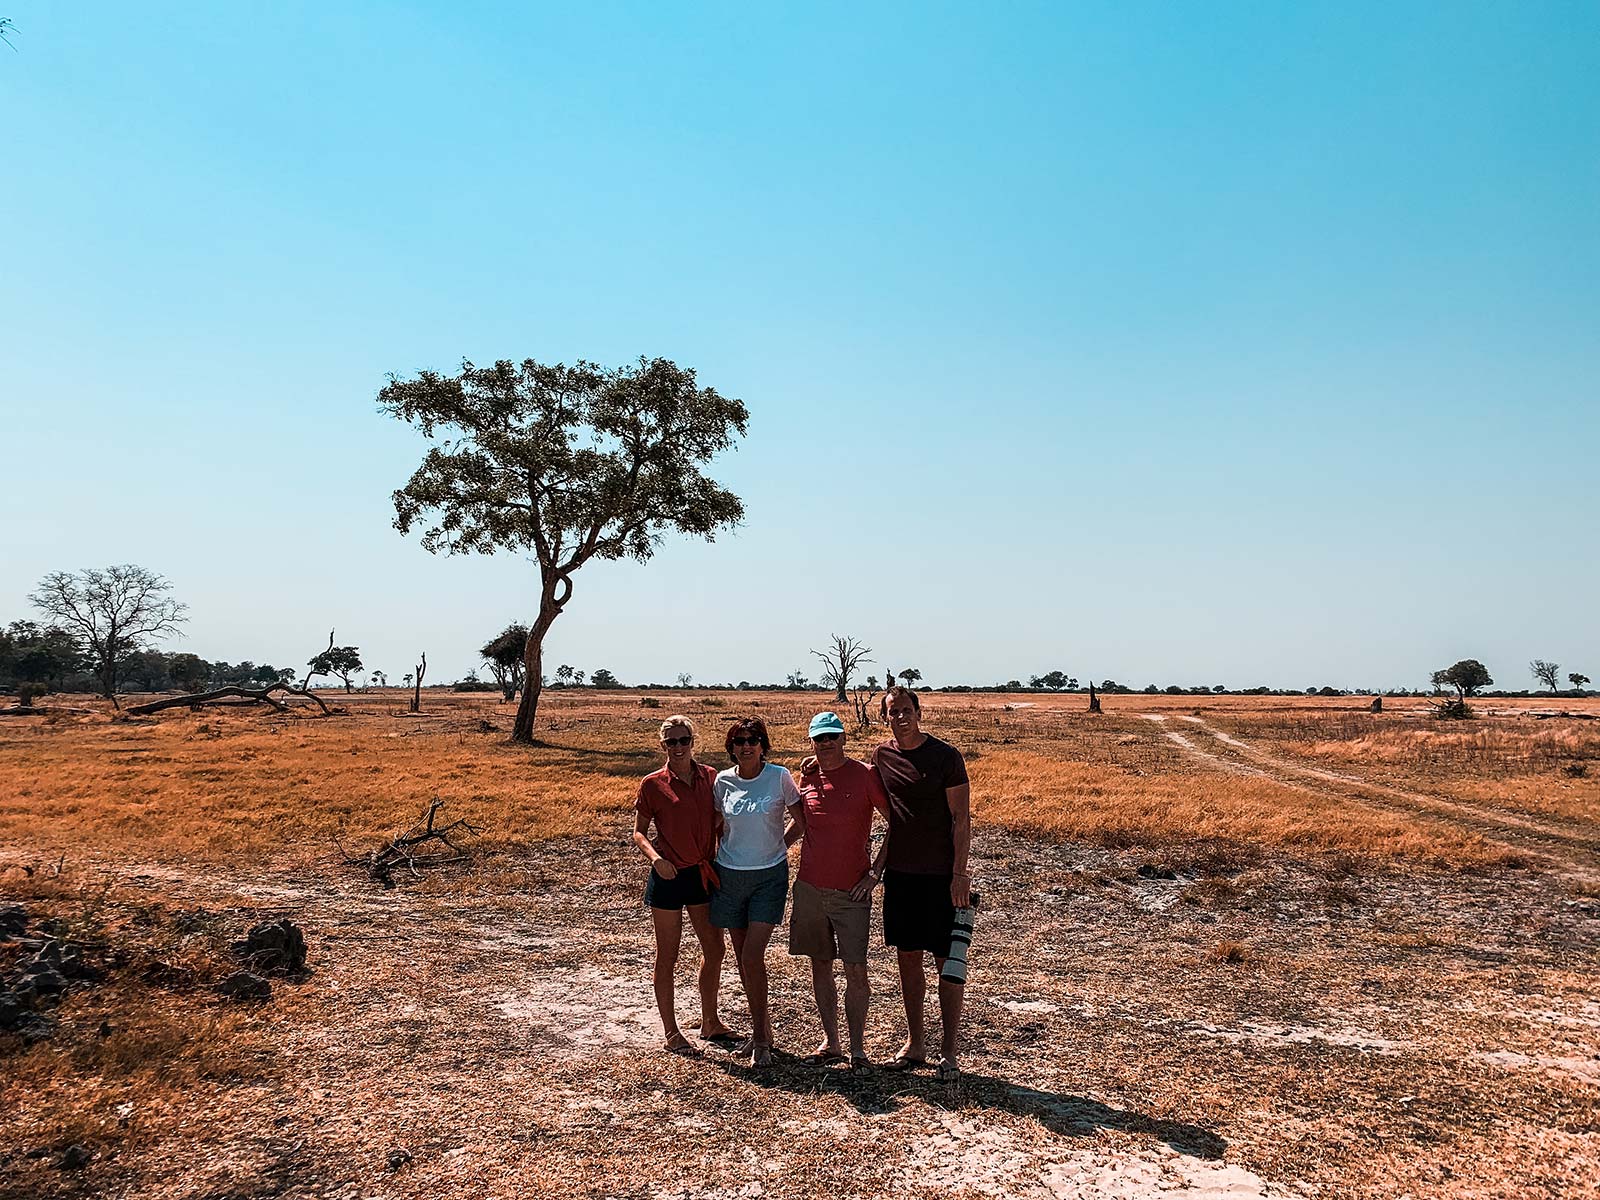 David Simpson and family at the plains in Botswana, Africa. My best photos of Botswana